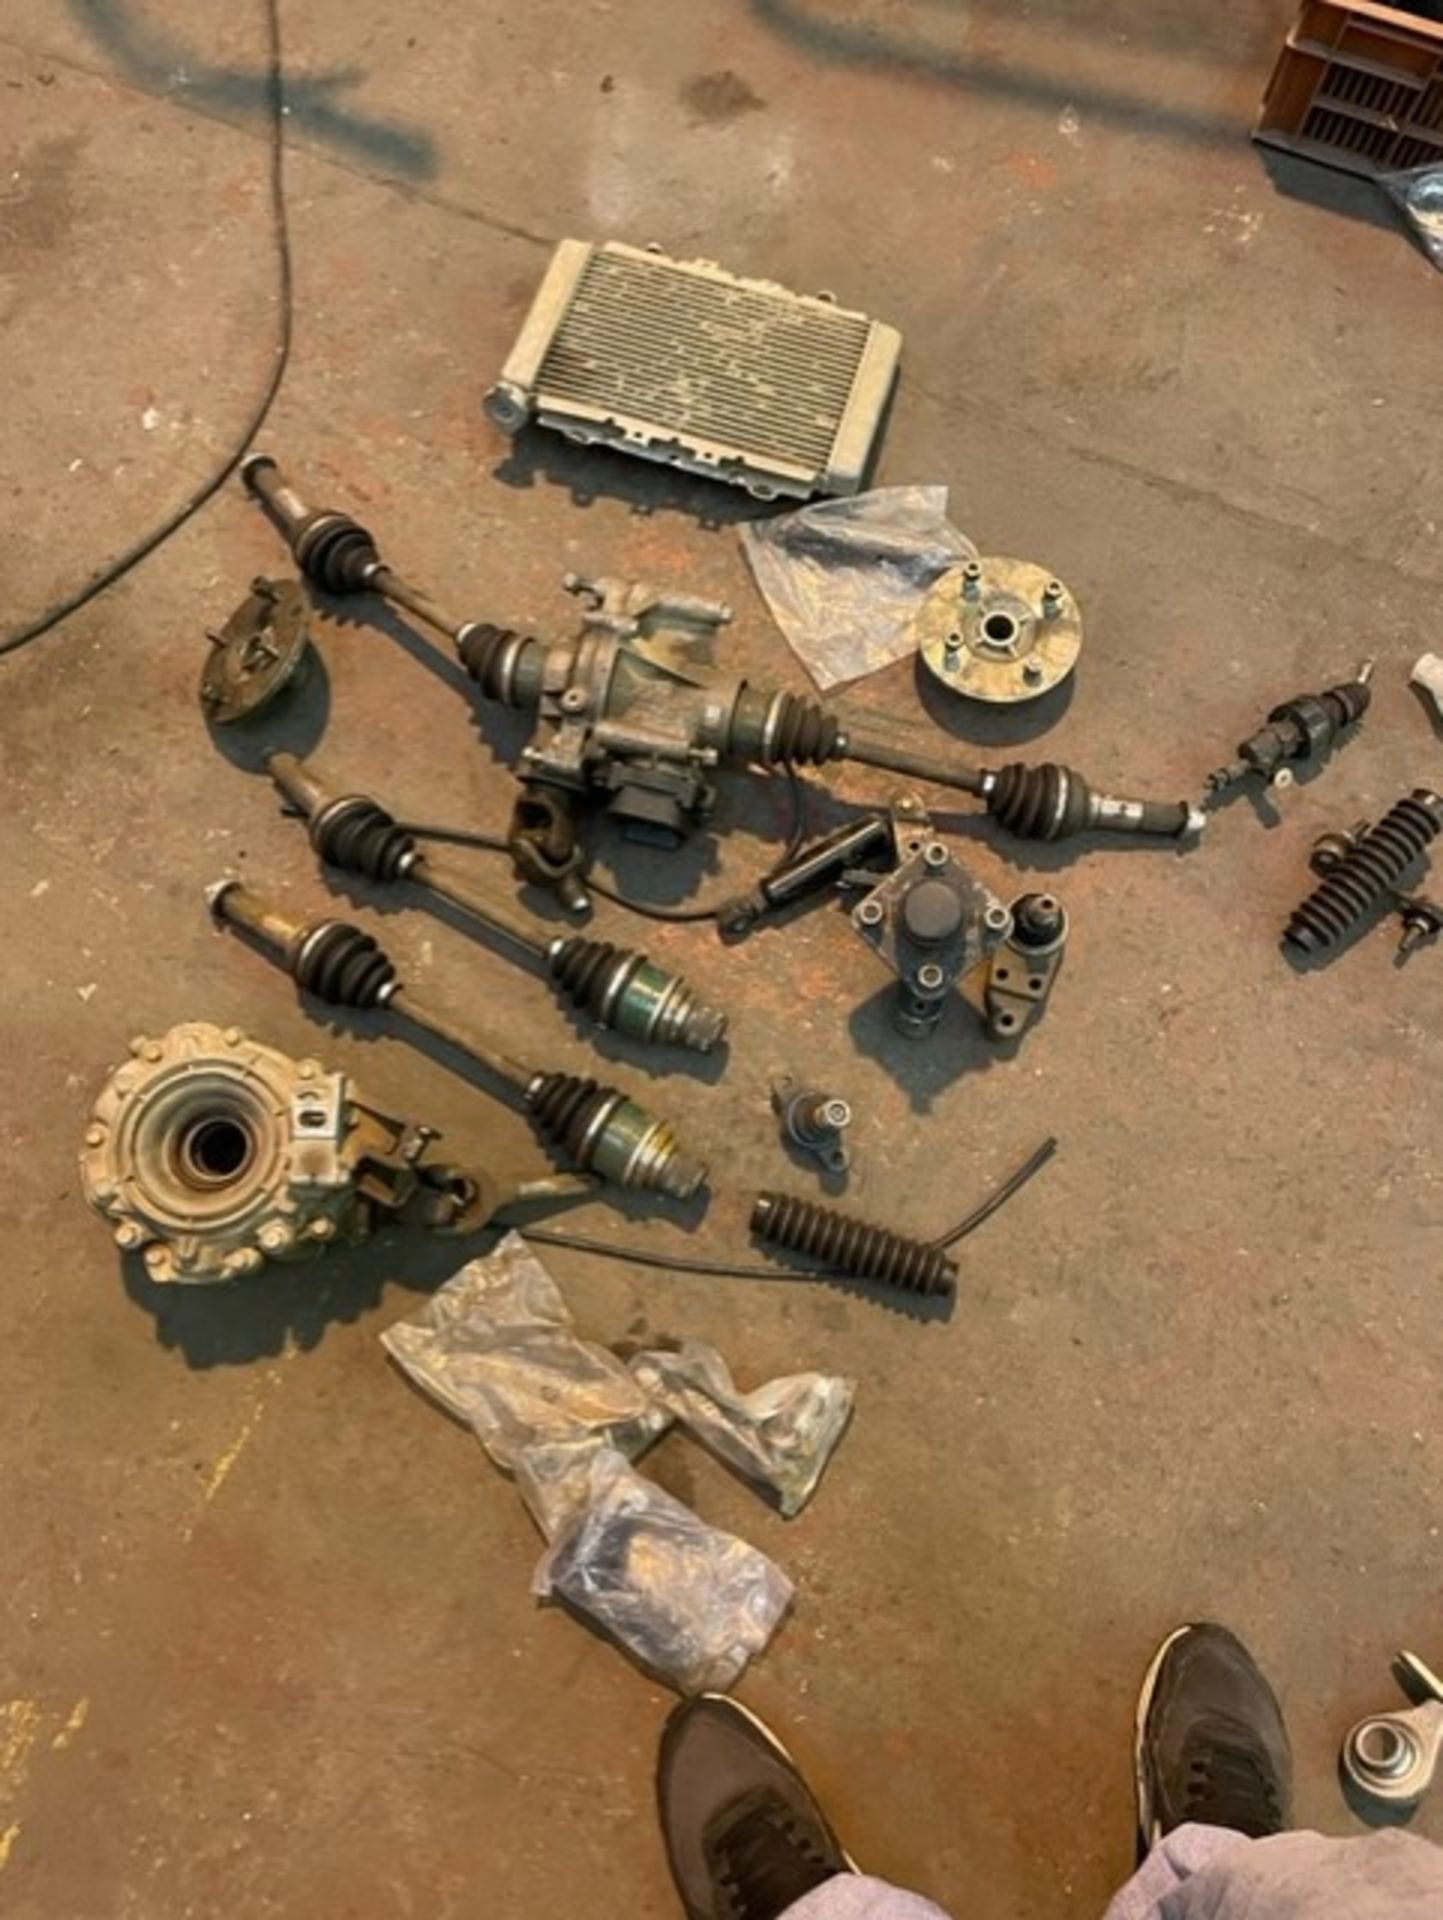 Yamaha quad bike parts gearbox drive shafts and ball joints etc